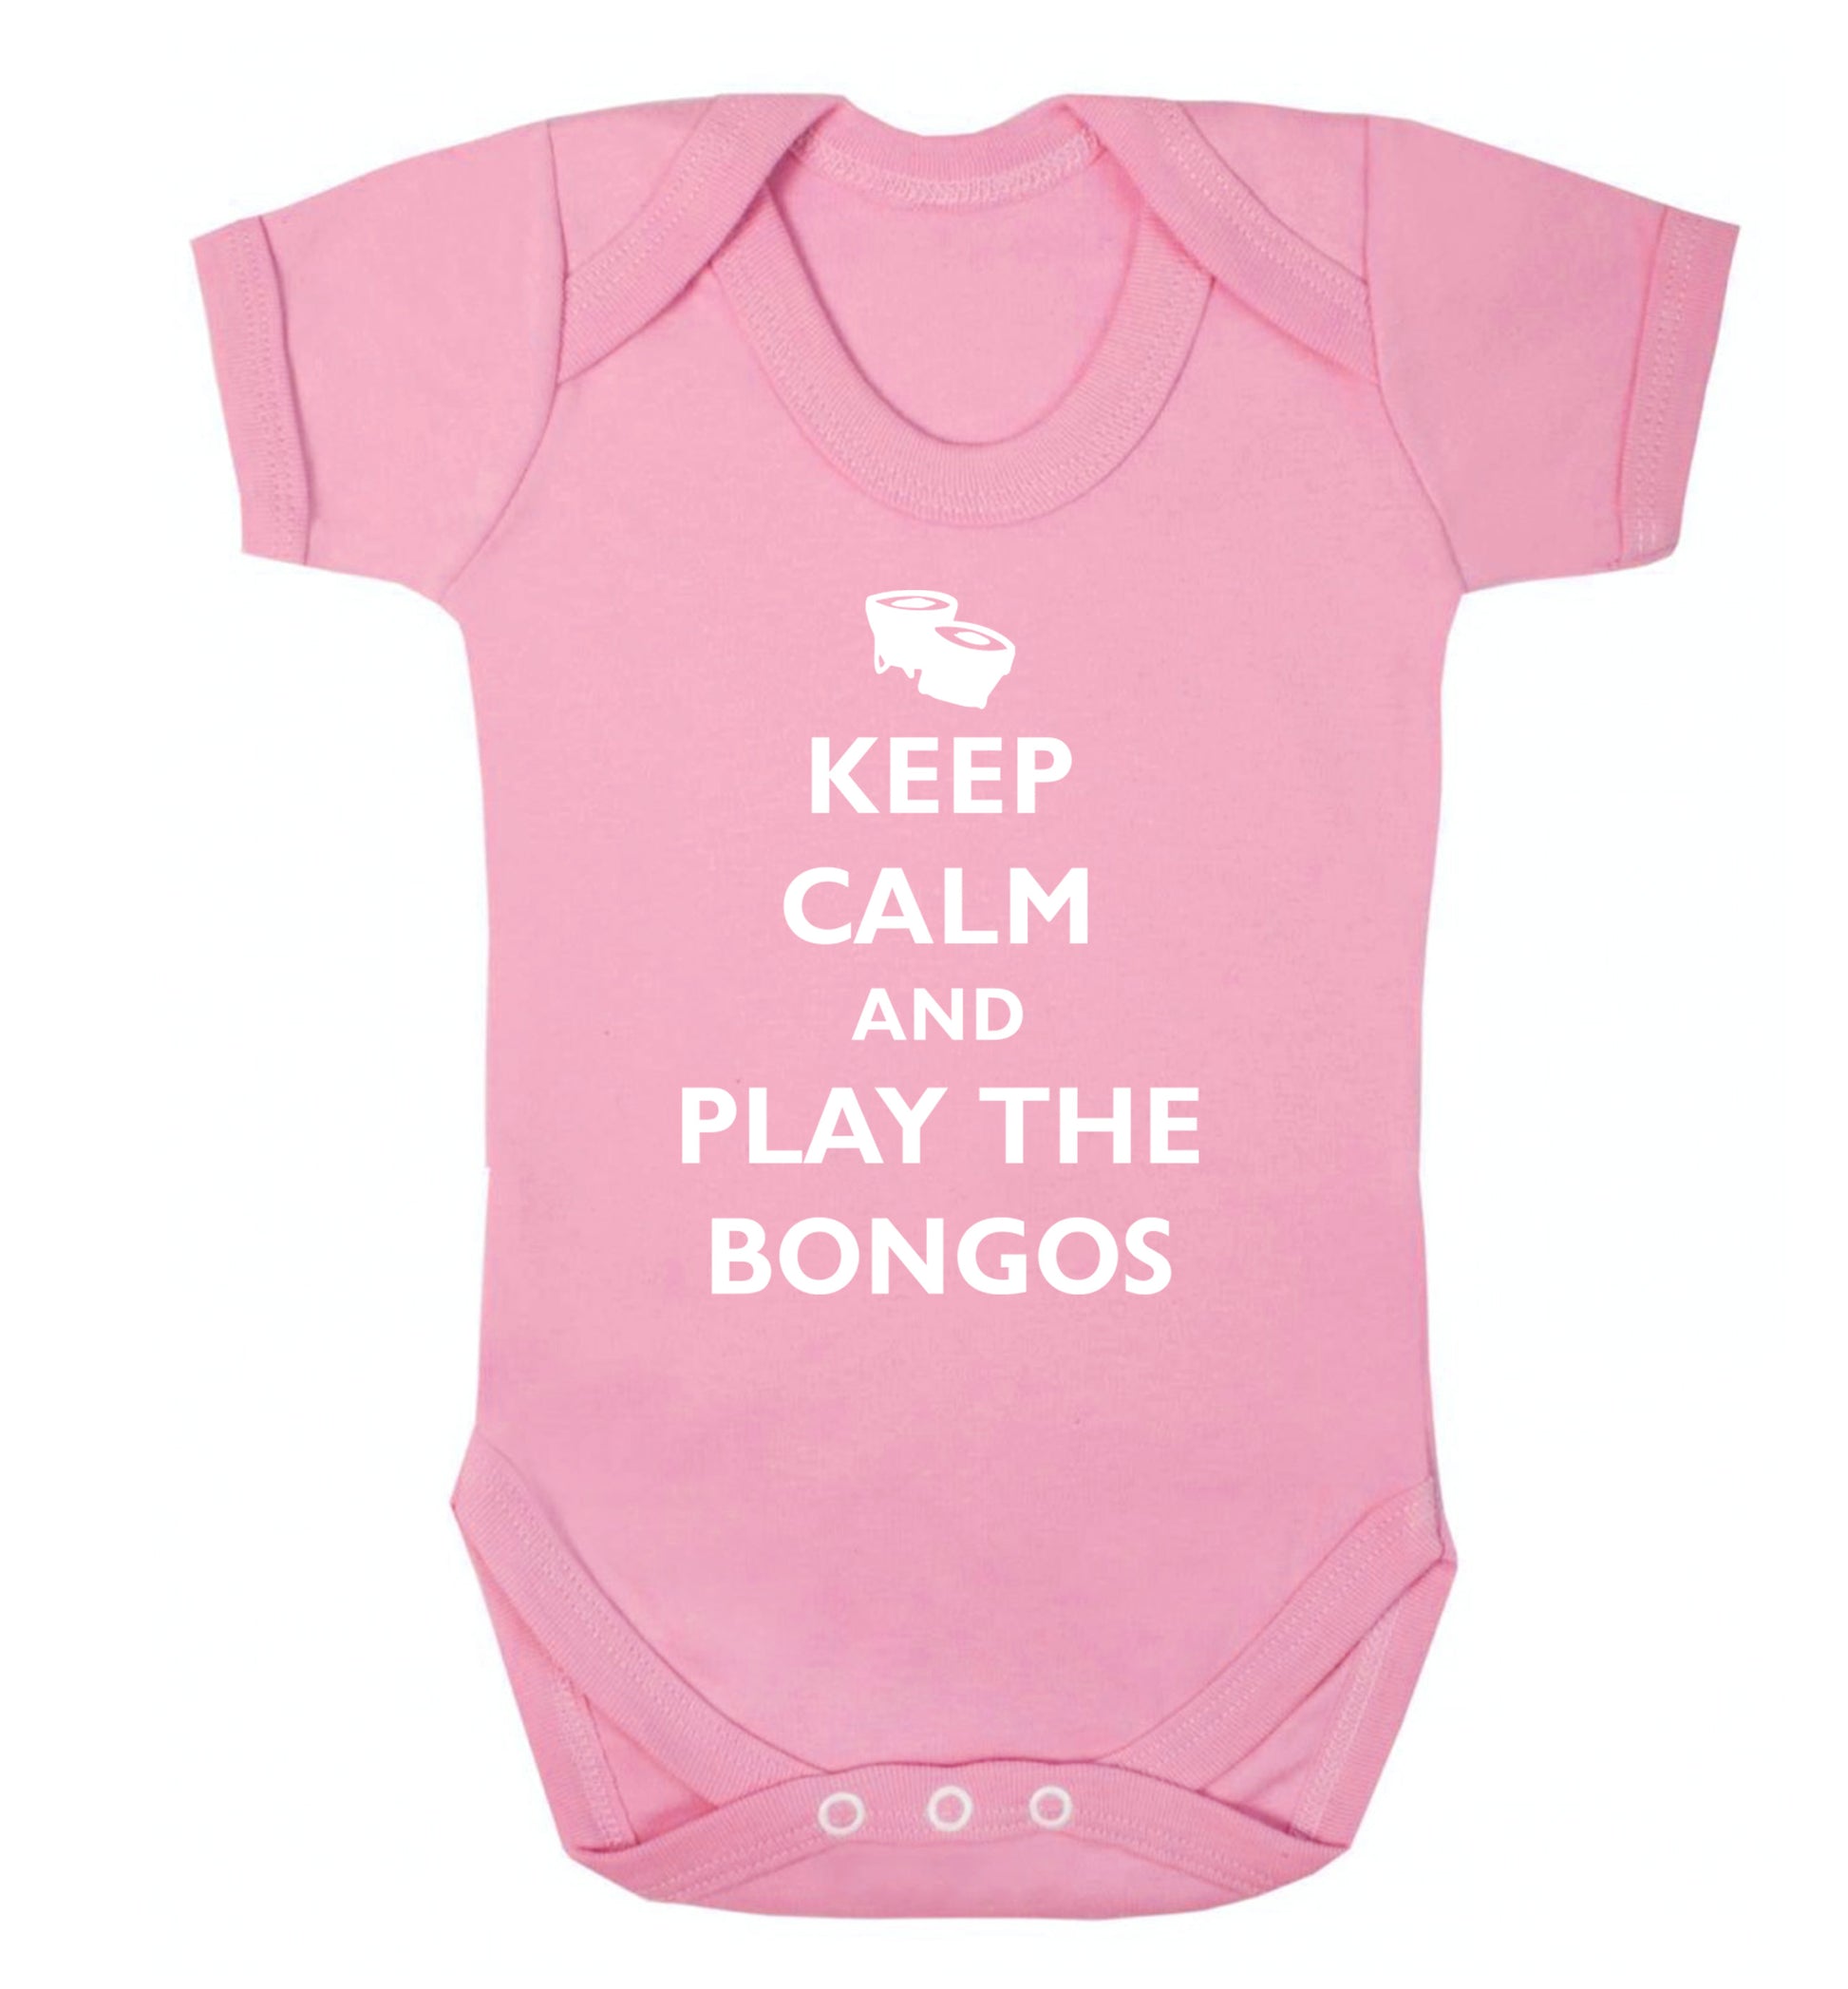 Keep calm and play the bongos Baby Vest pale pink 18-24 months